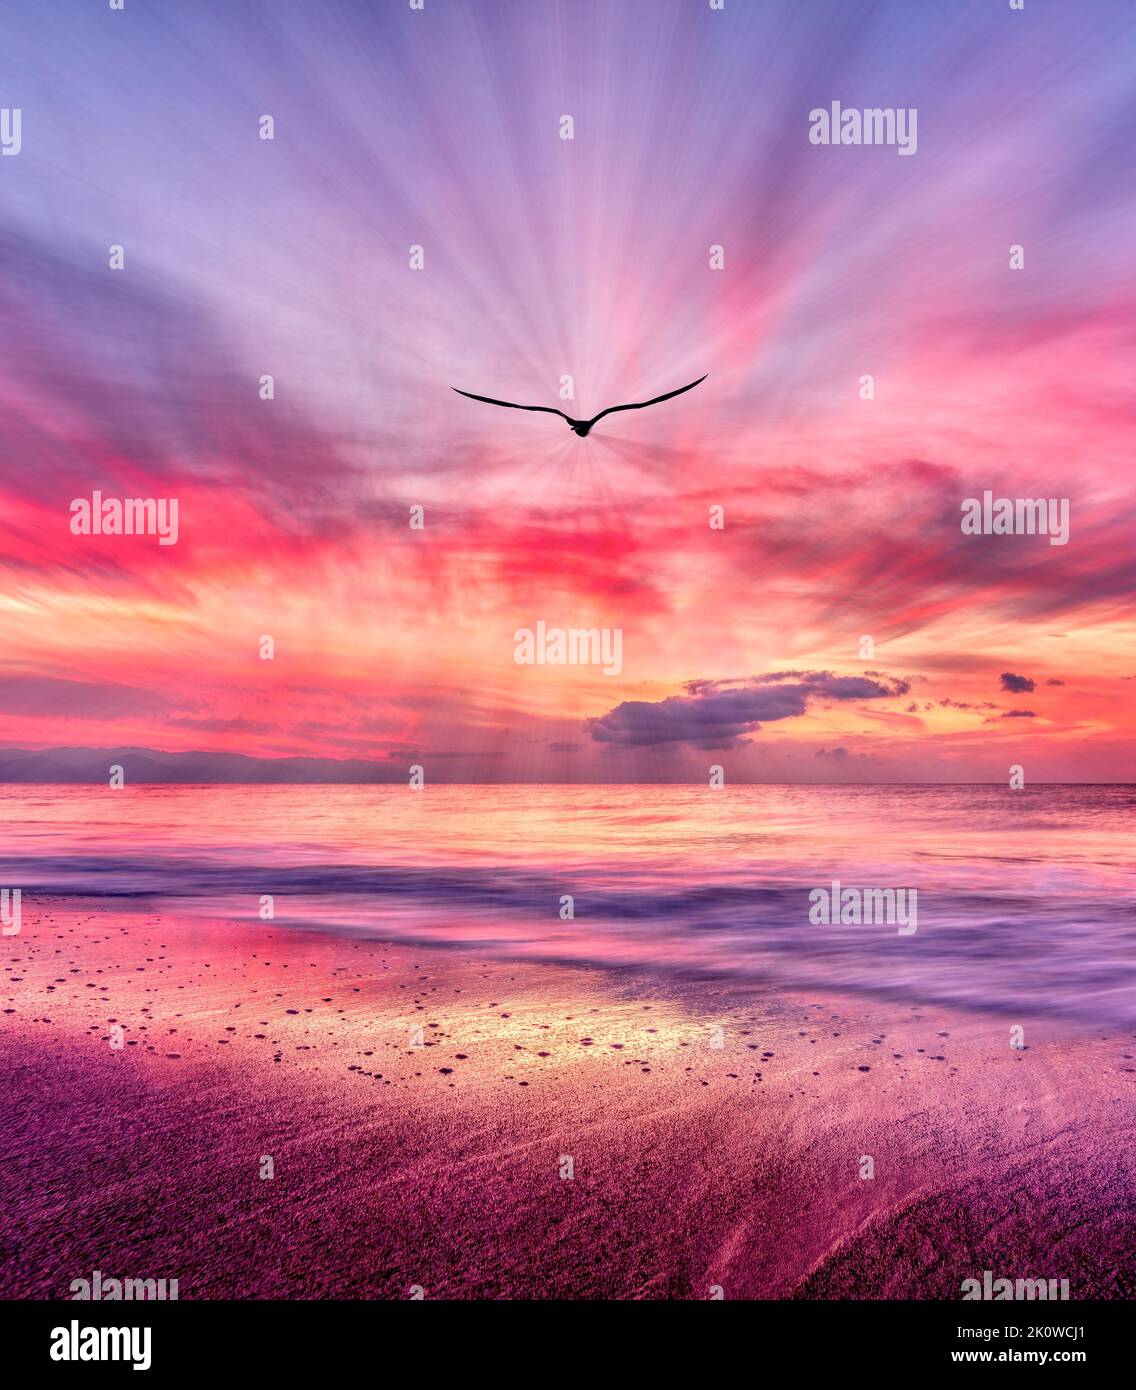 Ocean Landscape Sunset With A Birds Flying Towards A Colorful Romantic Sky In Vertical Image Format Stock Photo